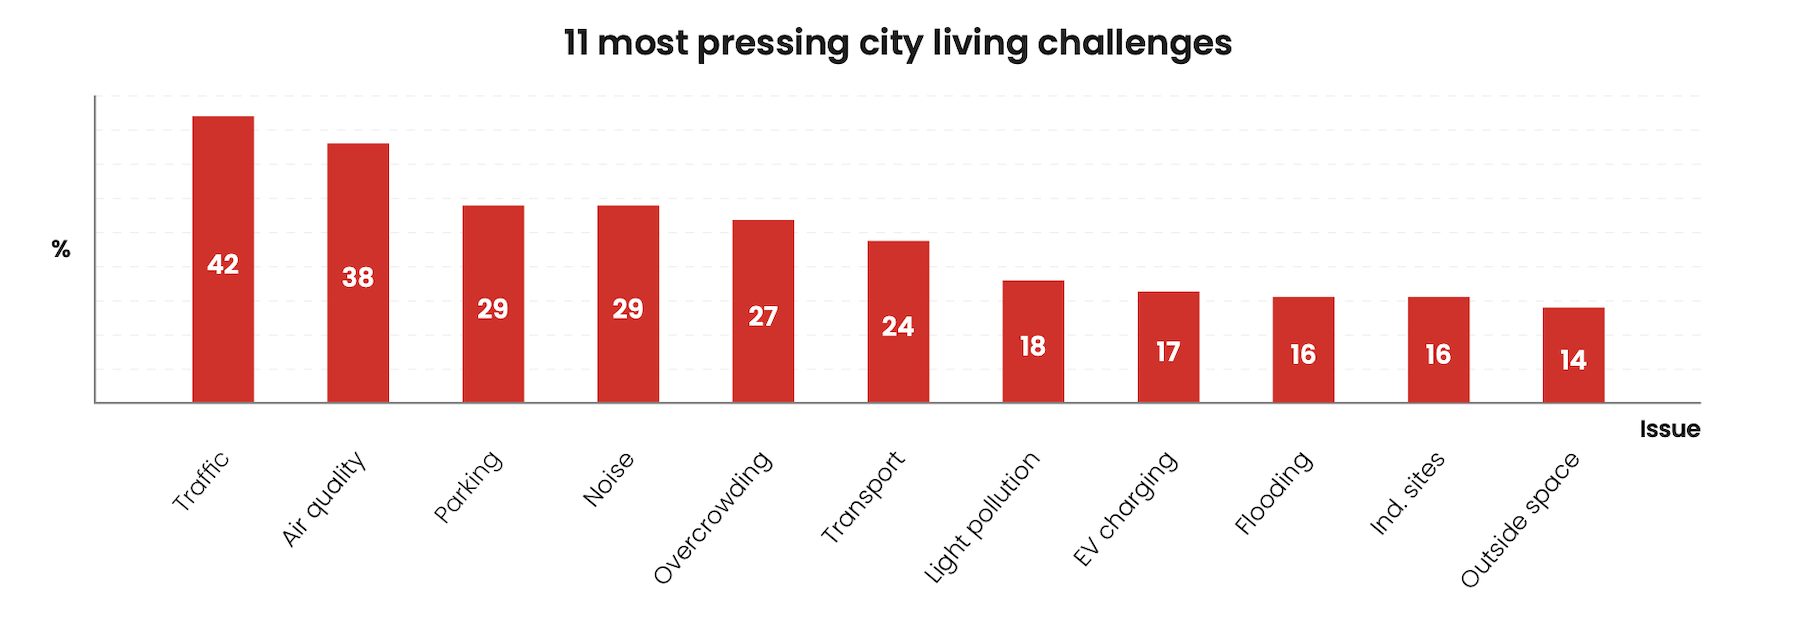 11 challenges to urban living